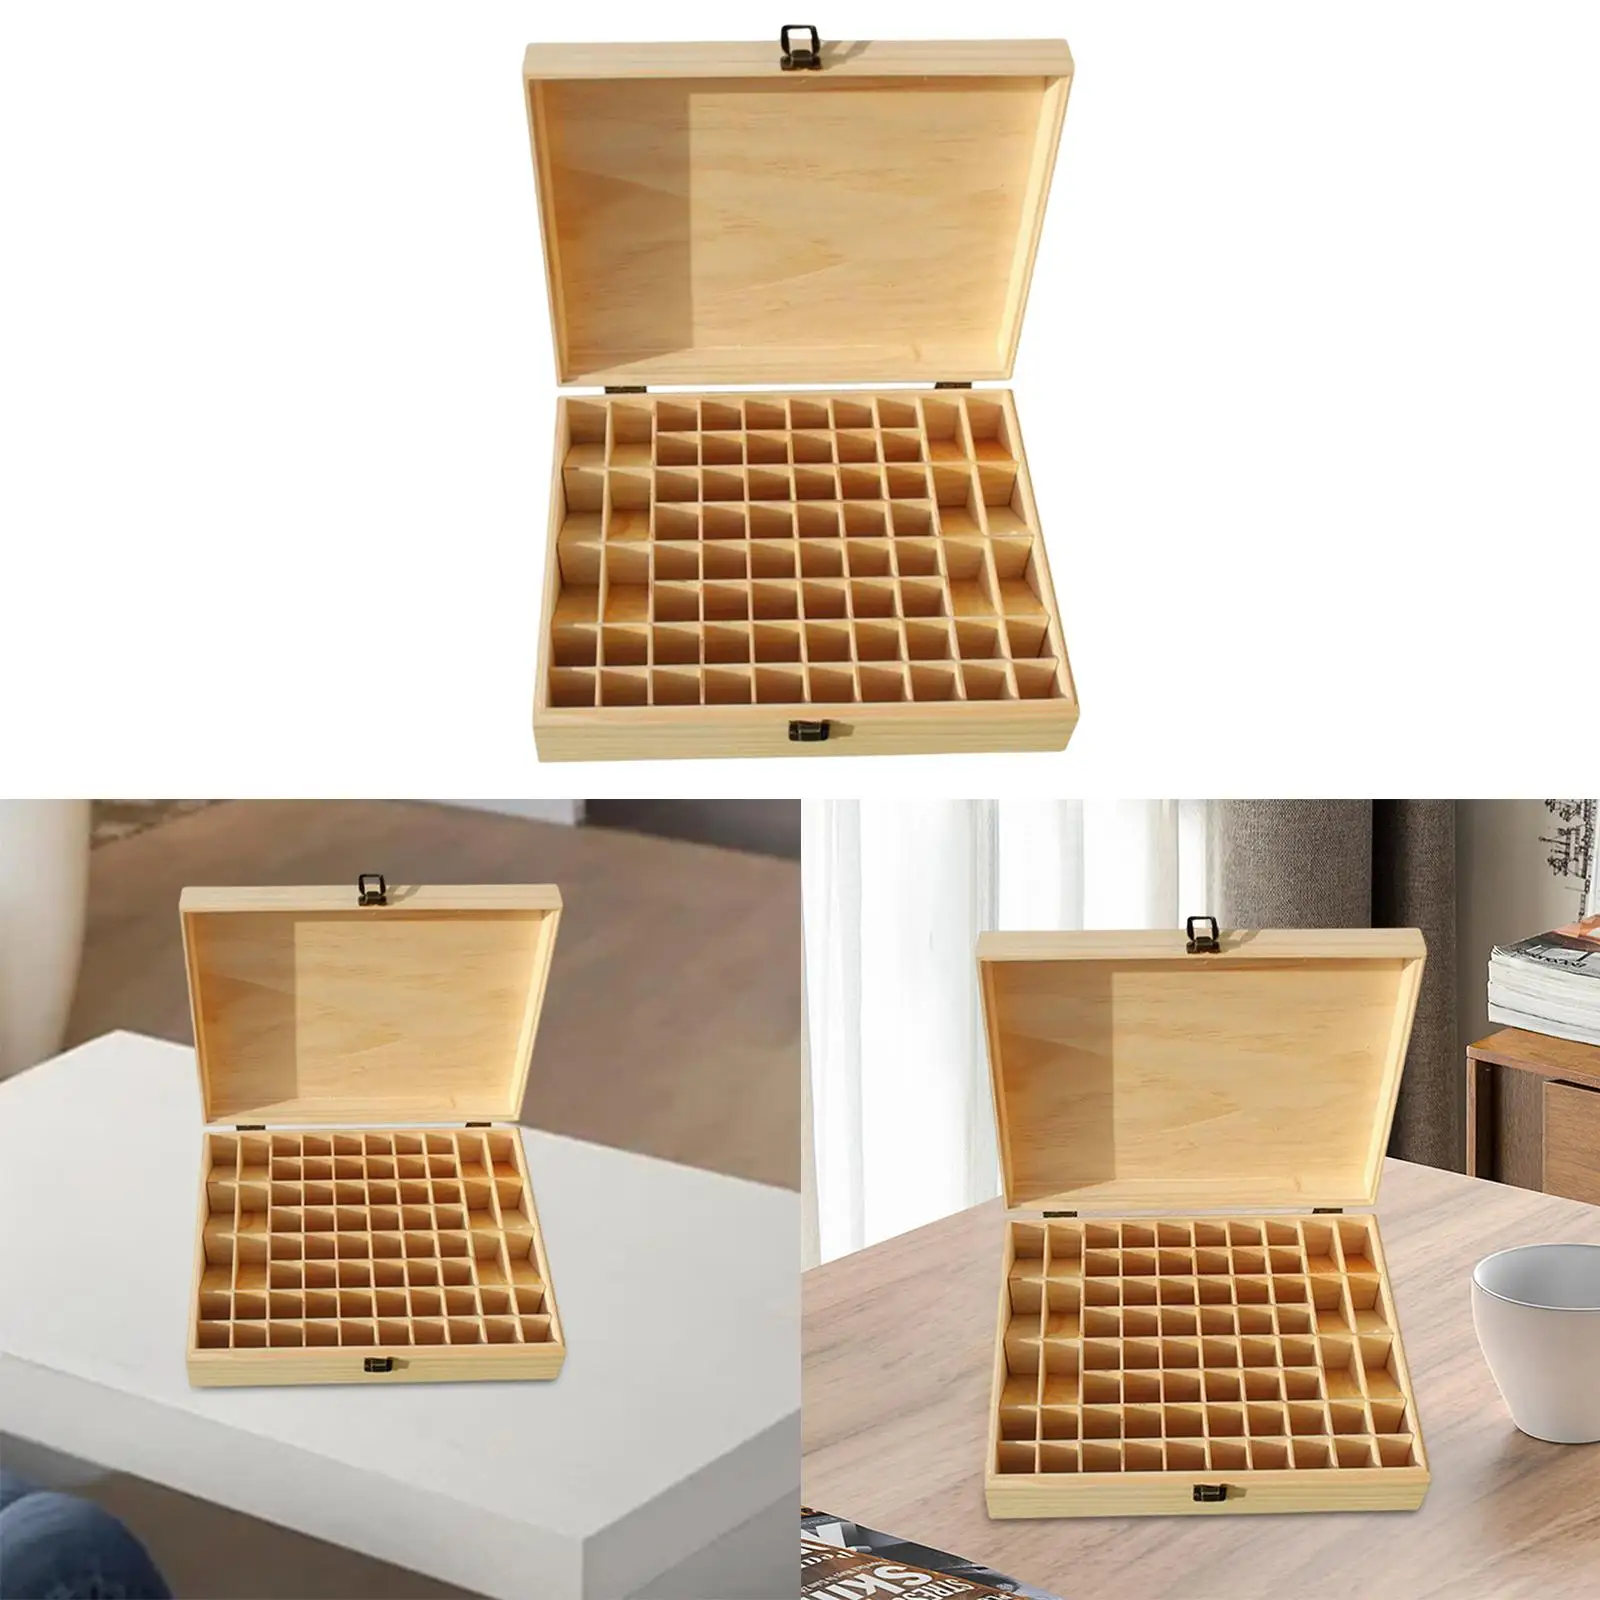 68 Compartments Essential Oil Storage Box Carrying Case for jewelry